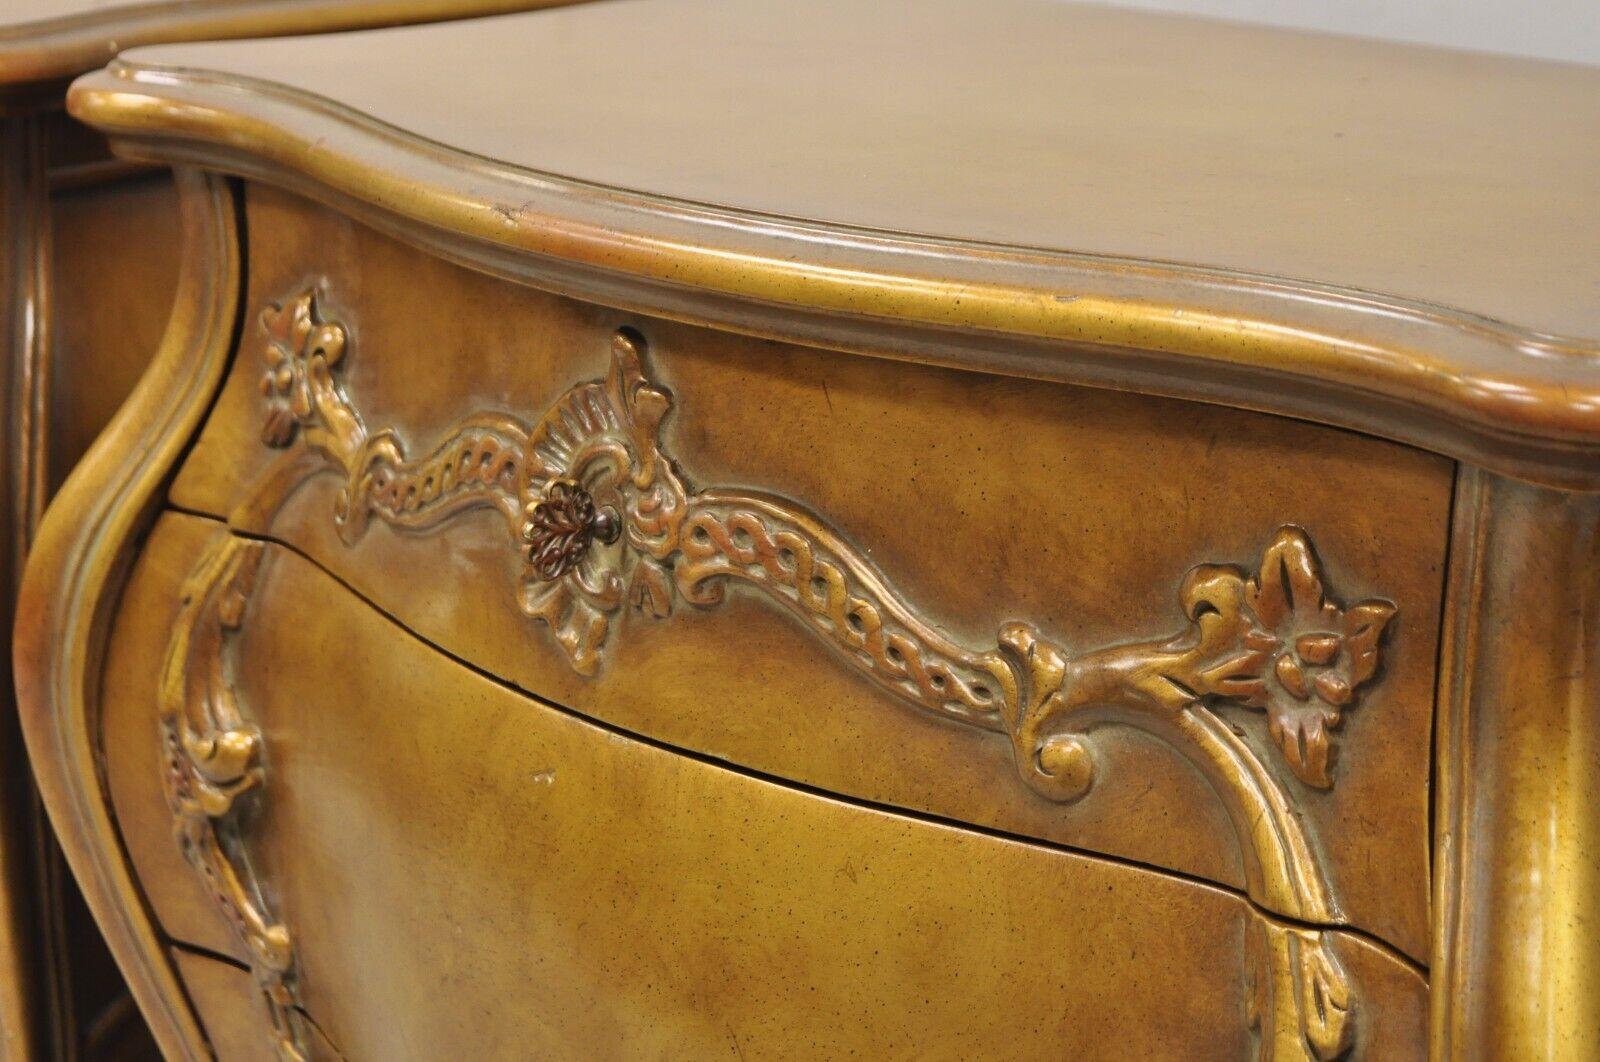 Vintage French Rococo Baroque Style Gold Gilt Bombe Nightstands - a Pair For Sale 6